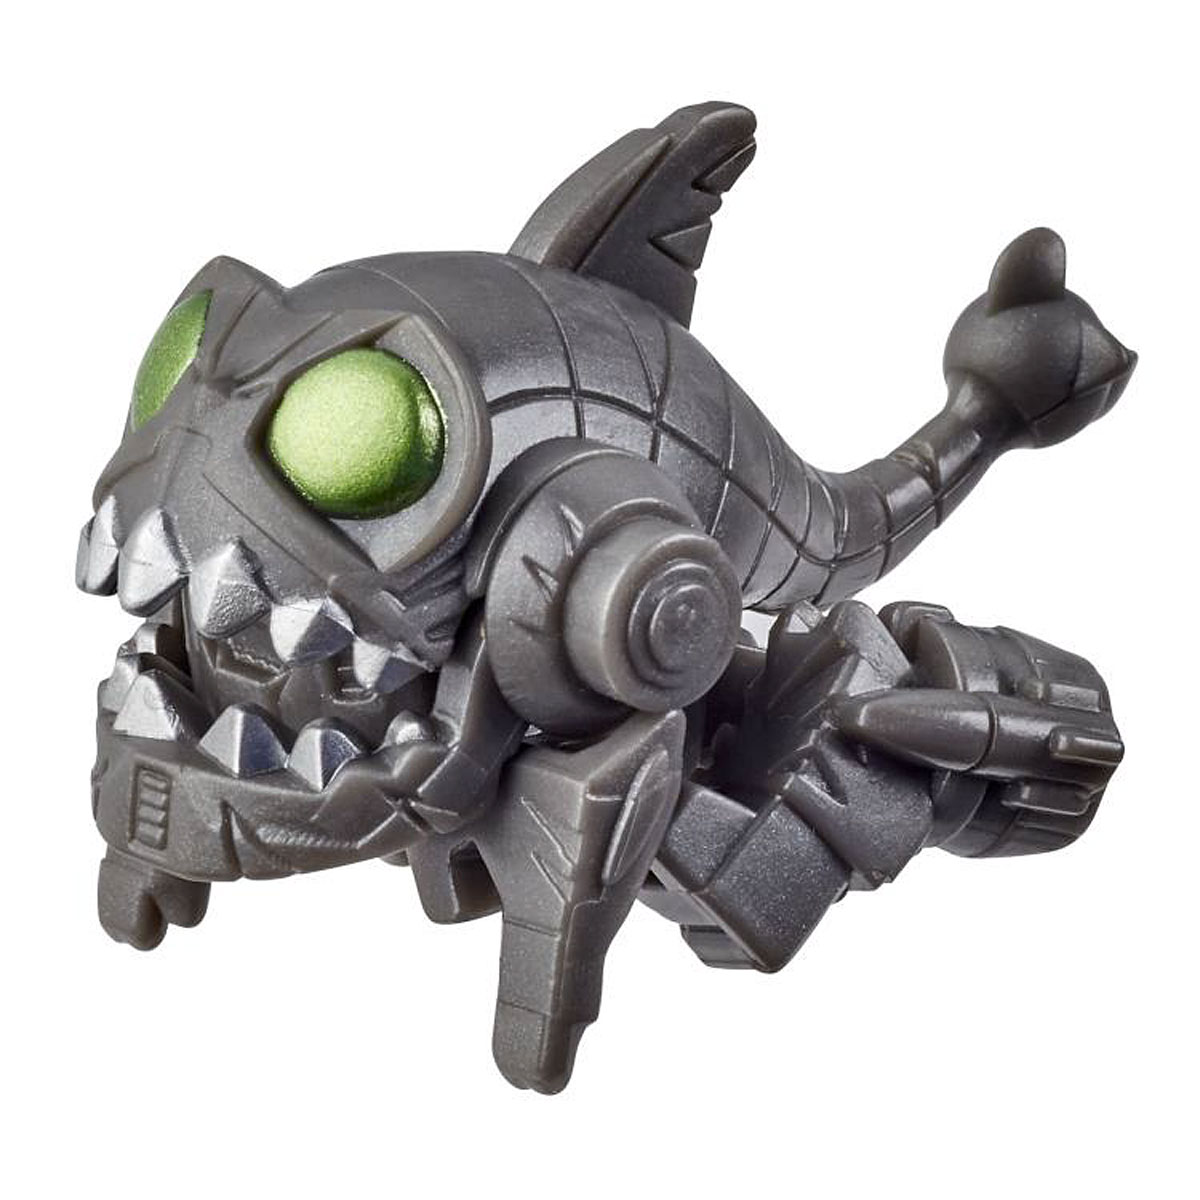 GNAW SHARKTICON Transformers Cyberverse Tiny Turbo Changers Series 4 2020 New